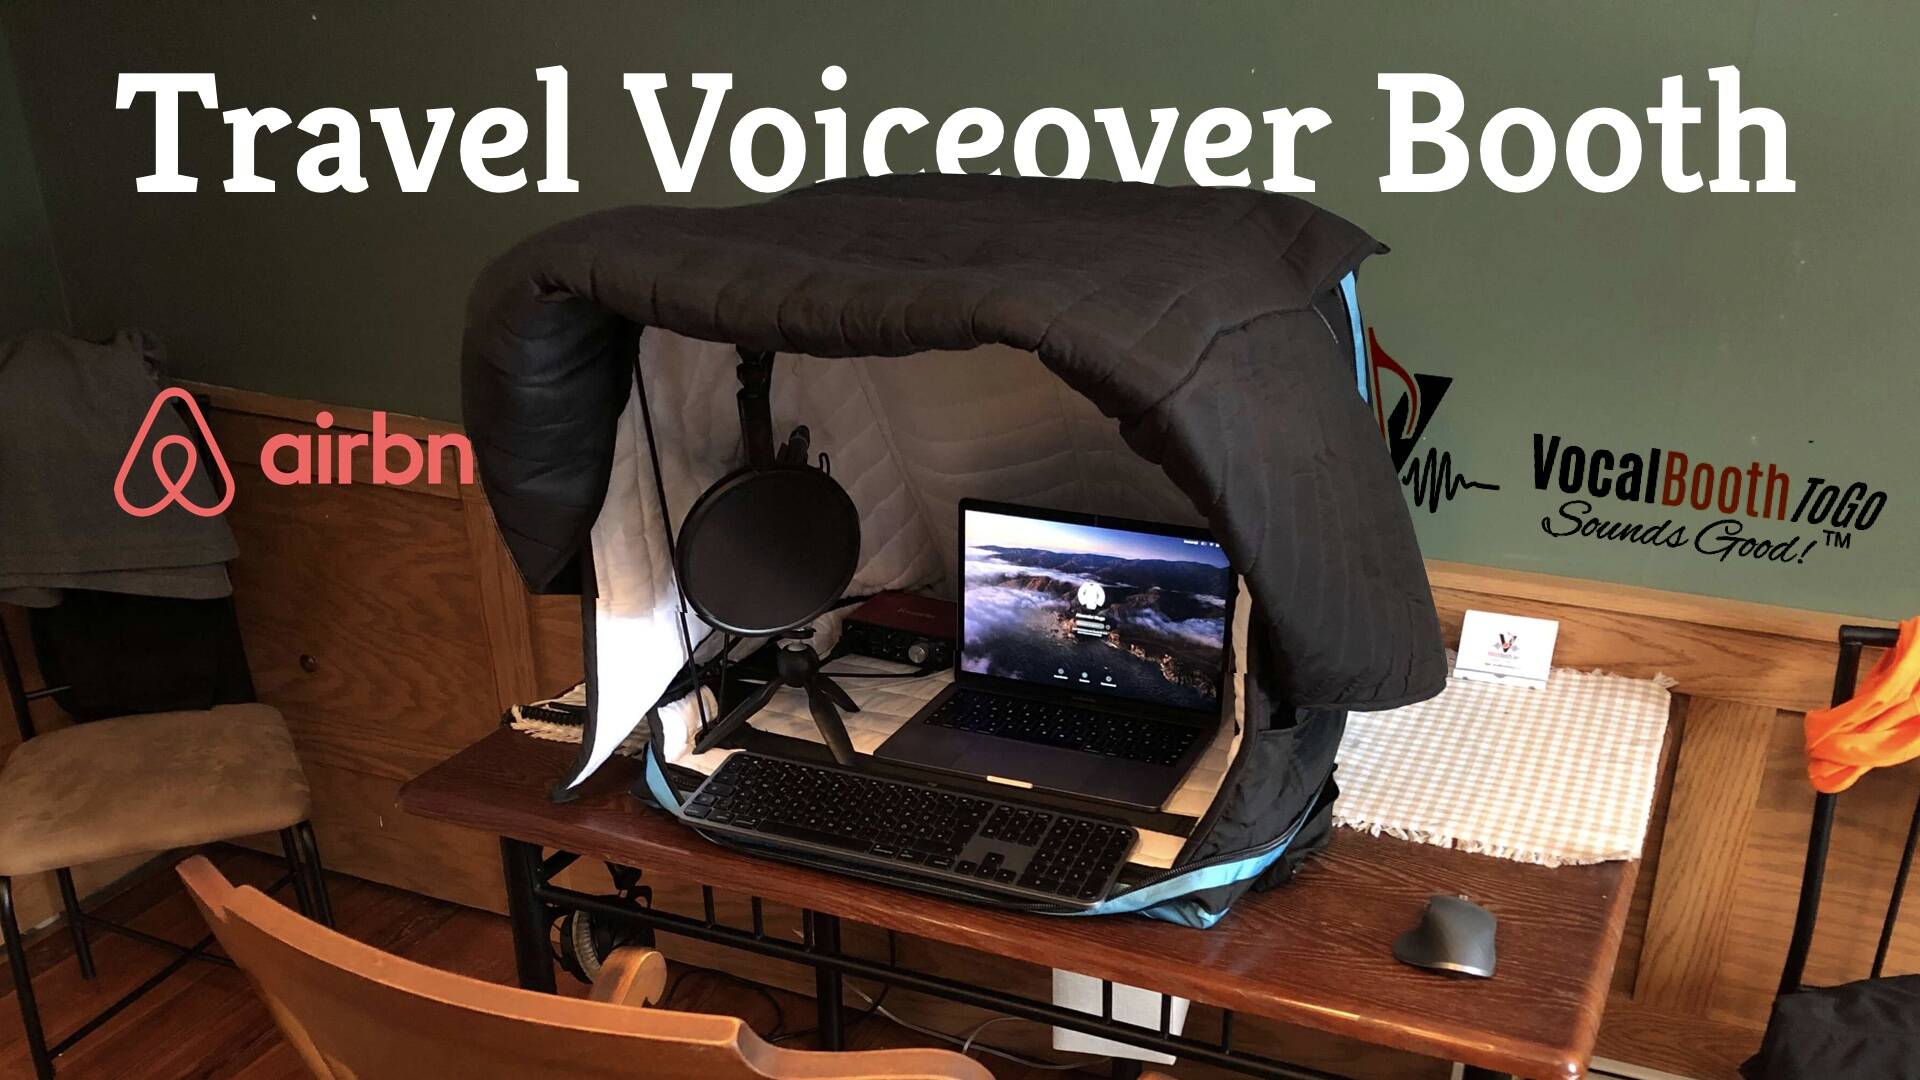 202212201408 toot-tweet-LinkedIn-YouTube- got my voiceover booth set up in my Airbnb here in.jpg